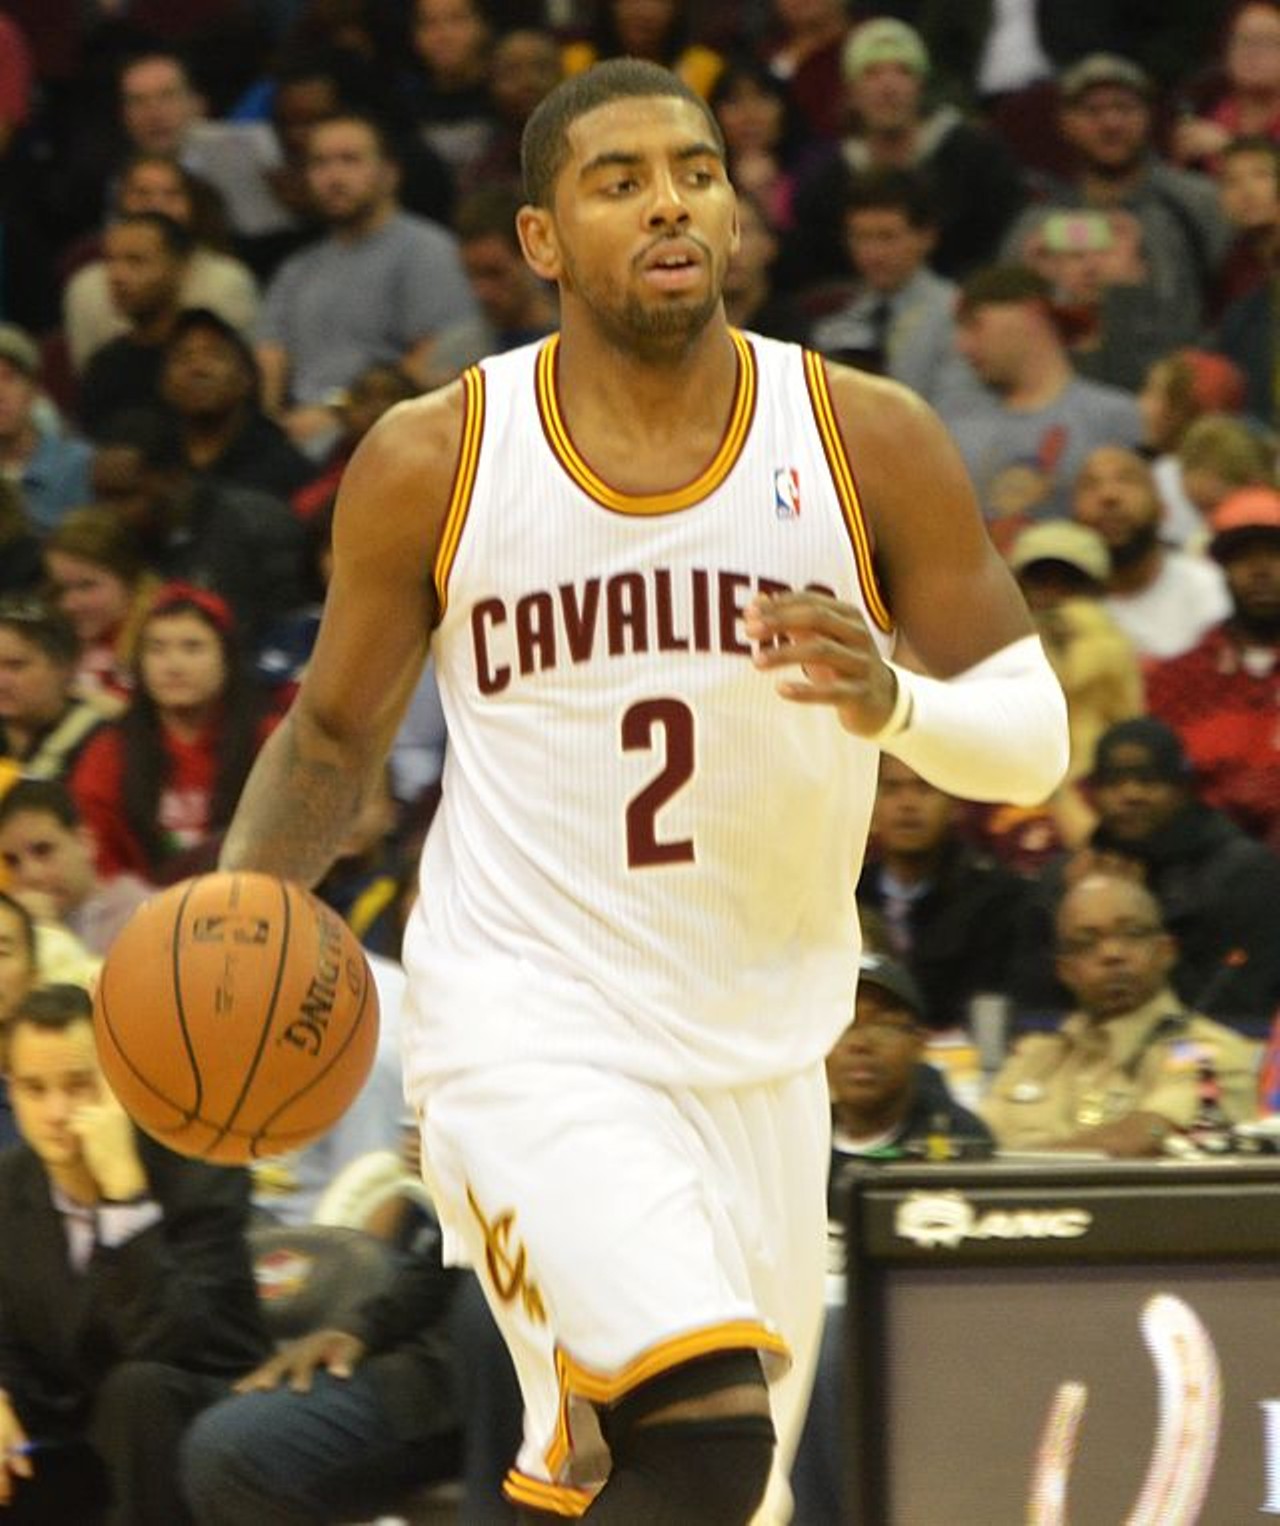 After Kyrie Irving’s terrifying near-injury against the Thunder, it’s just a relief to see him back on the court, doing — as sportswriters like to say — “Kyrie things.” We’re in the middle of a nice little homestand here, so go check out the Cavs take on the Brooklyn Nets at the Q tonight at 7:30. You can expect all the fireworks and alley-oops from last week’s matchup, which the Cavs decisively won, but just don’t expect Jay-Z, Beyonce, Prince William and Kate to show up. On this court, there’s only one King anyway. Tickets start at $25. (Sam Allard)